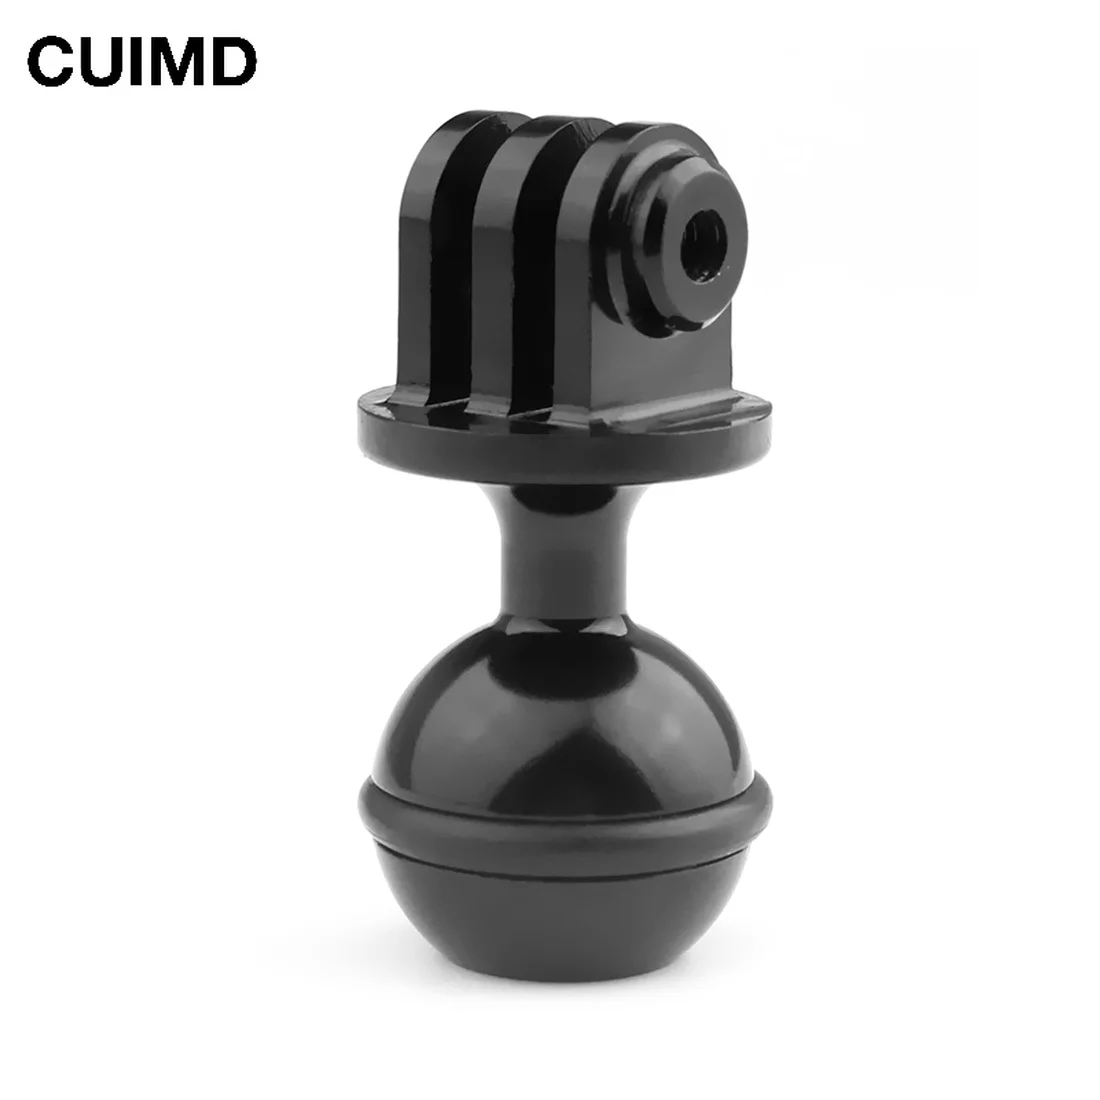 

CNC 360 Degree Rotation Ball Head Mount Tripod 2.5CM for Gopro Hero Session MAX OSMO for Xiaomi Yi SJCam GitUp Action Camera